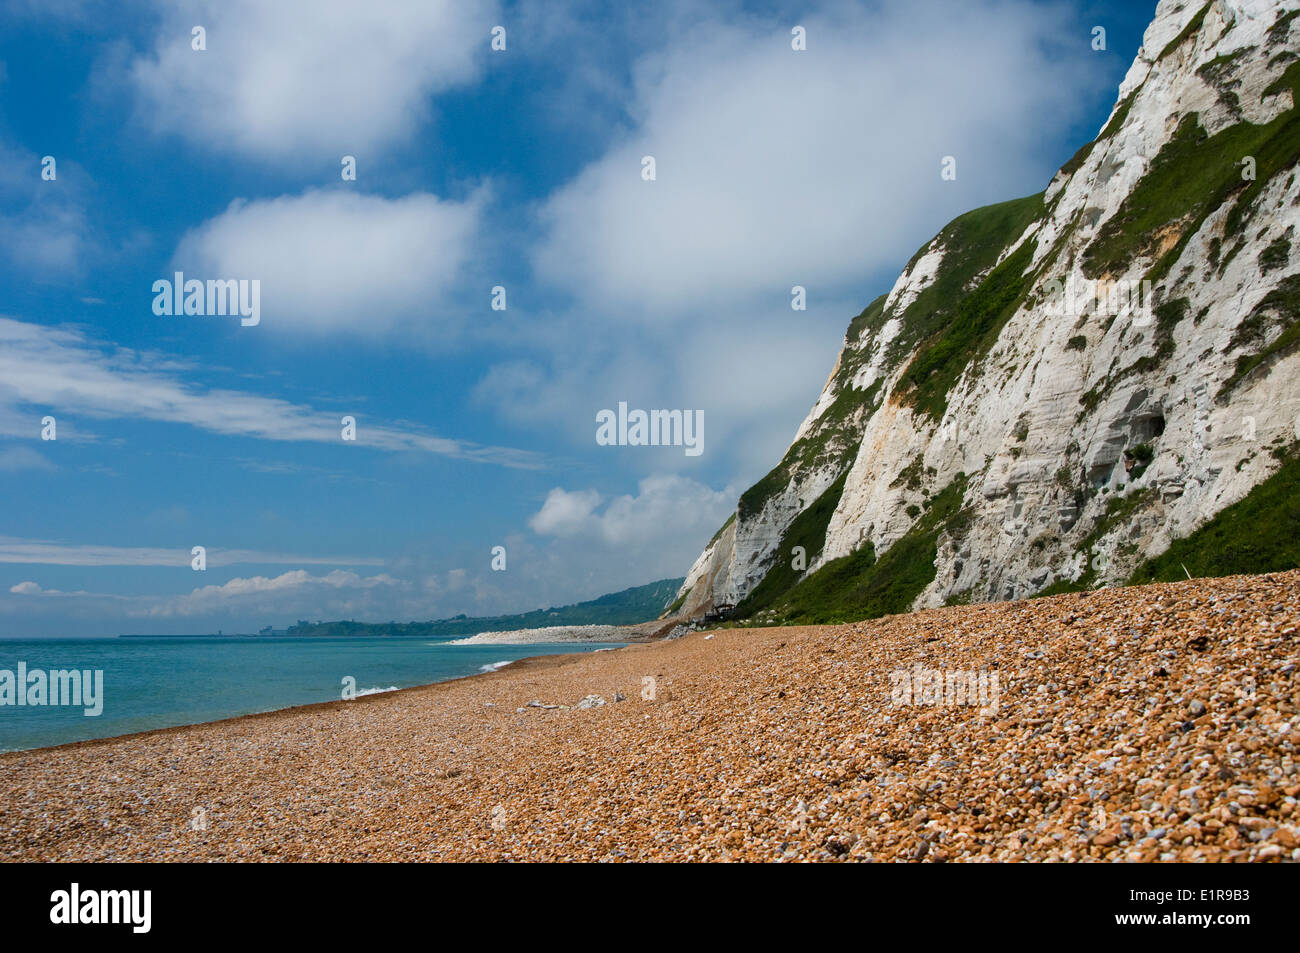 Secluded beach at the base of the White Cliffs of Dover, U.K. Samphire Hoe. Stock Photo